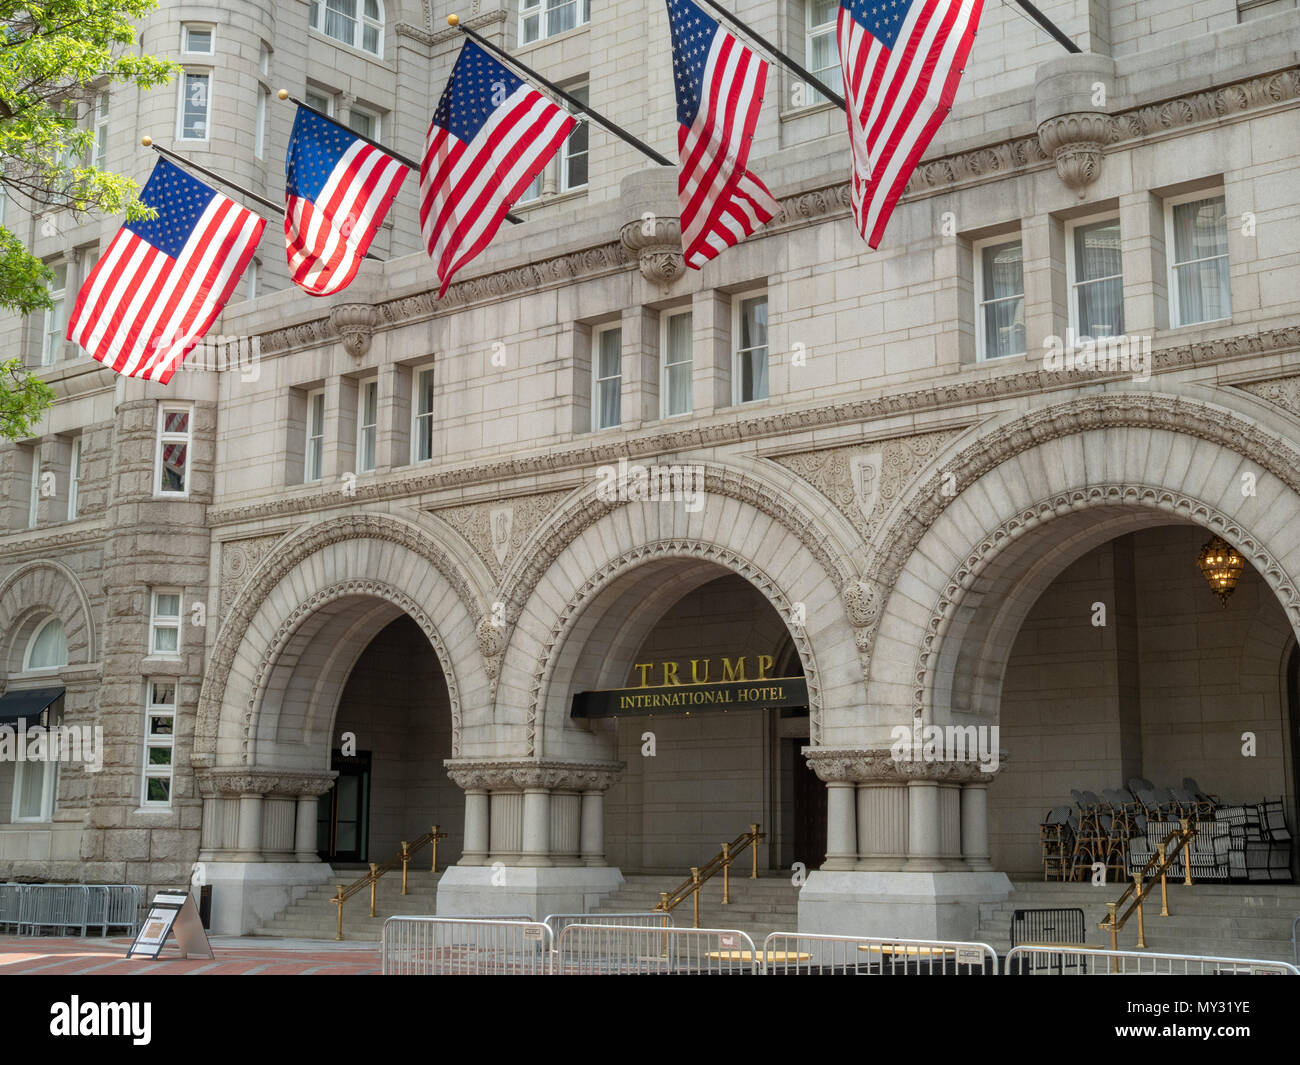 WASHINGTON, DC – MAY 15, 2018: Trump International Hotel Washington, D.C. at the Old Post Office Pavilion in the nation’s capital. Stock Photo